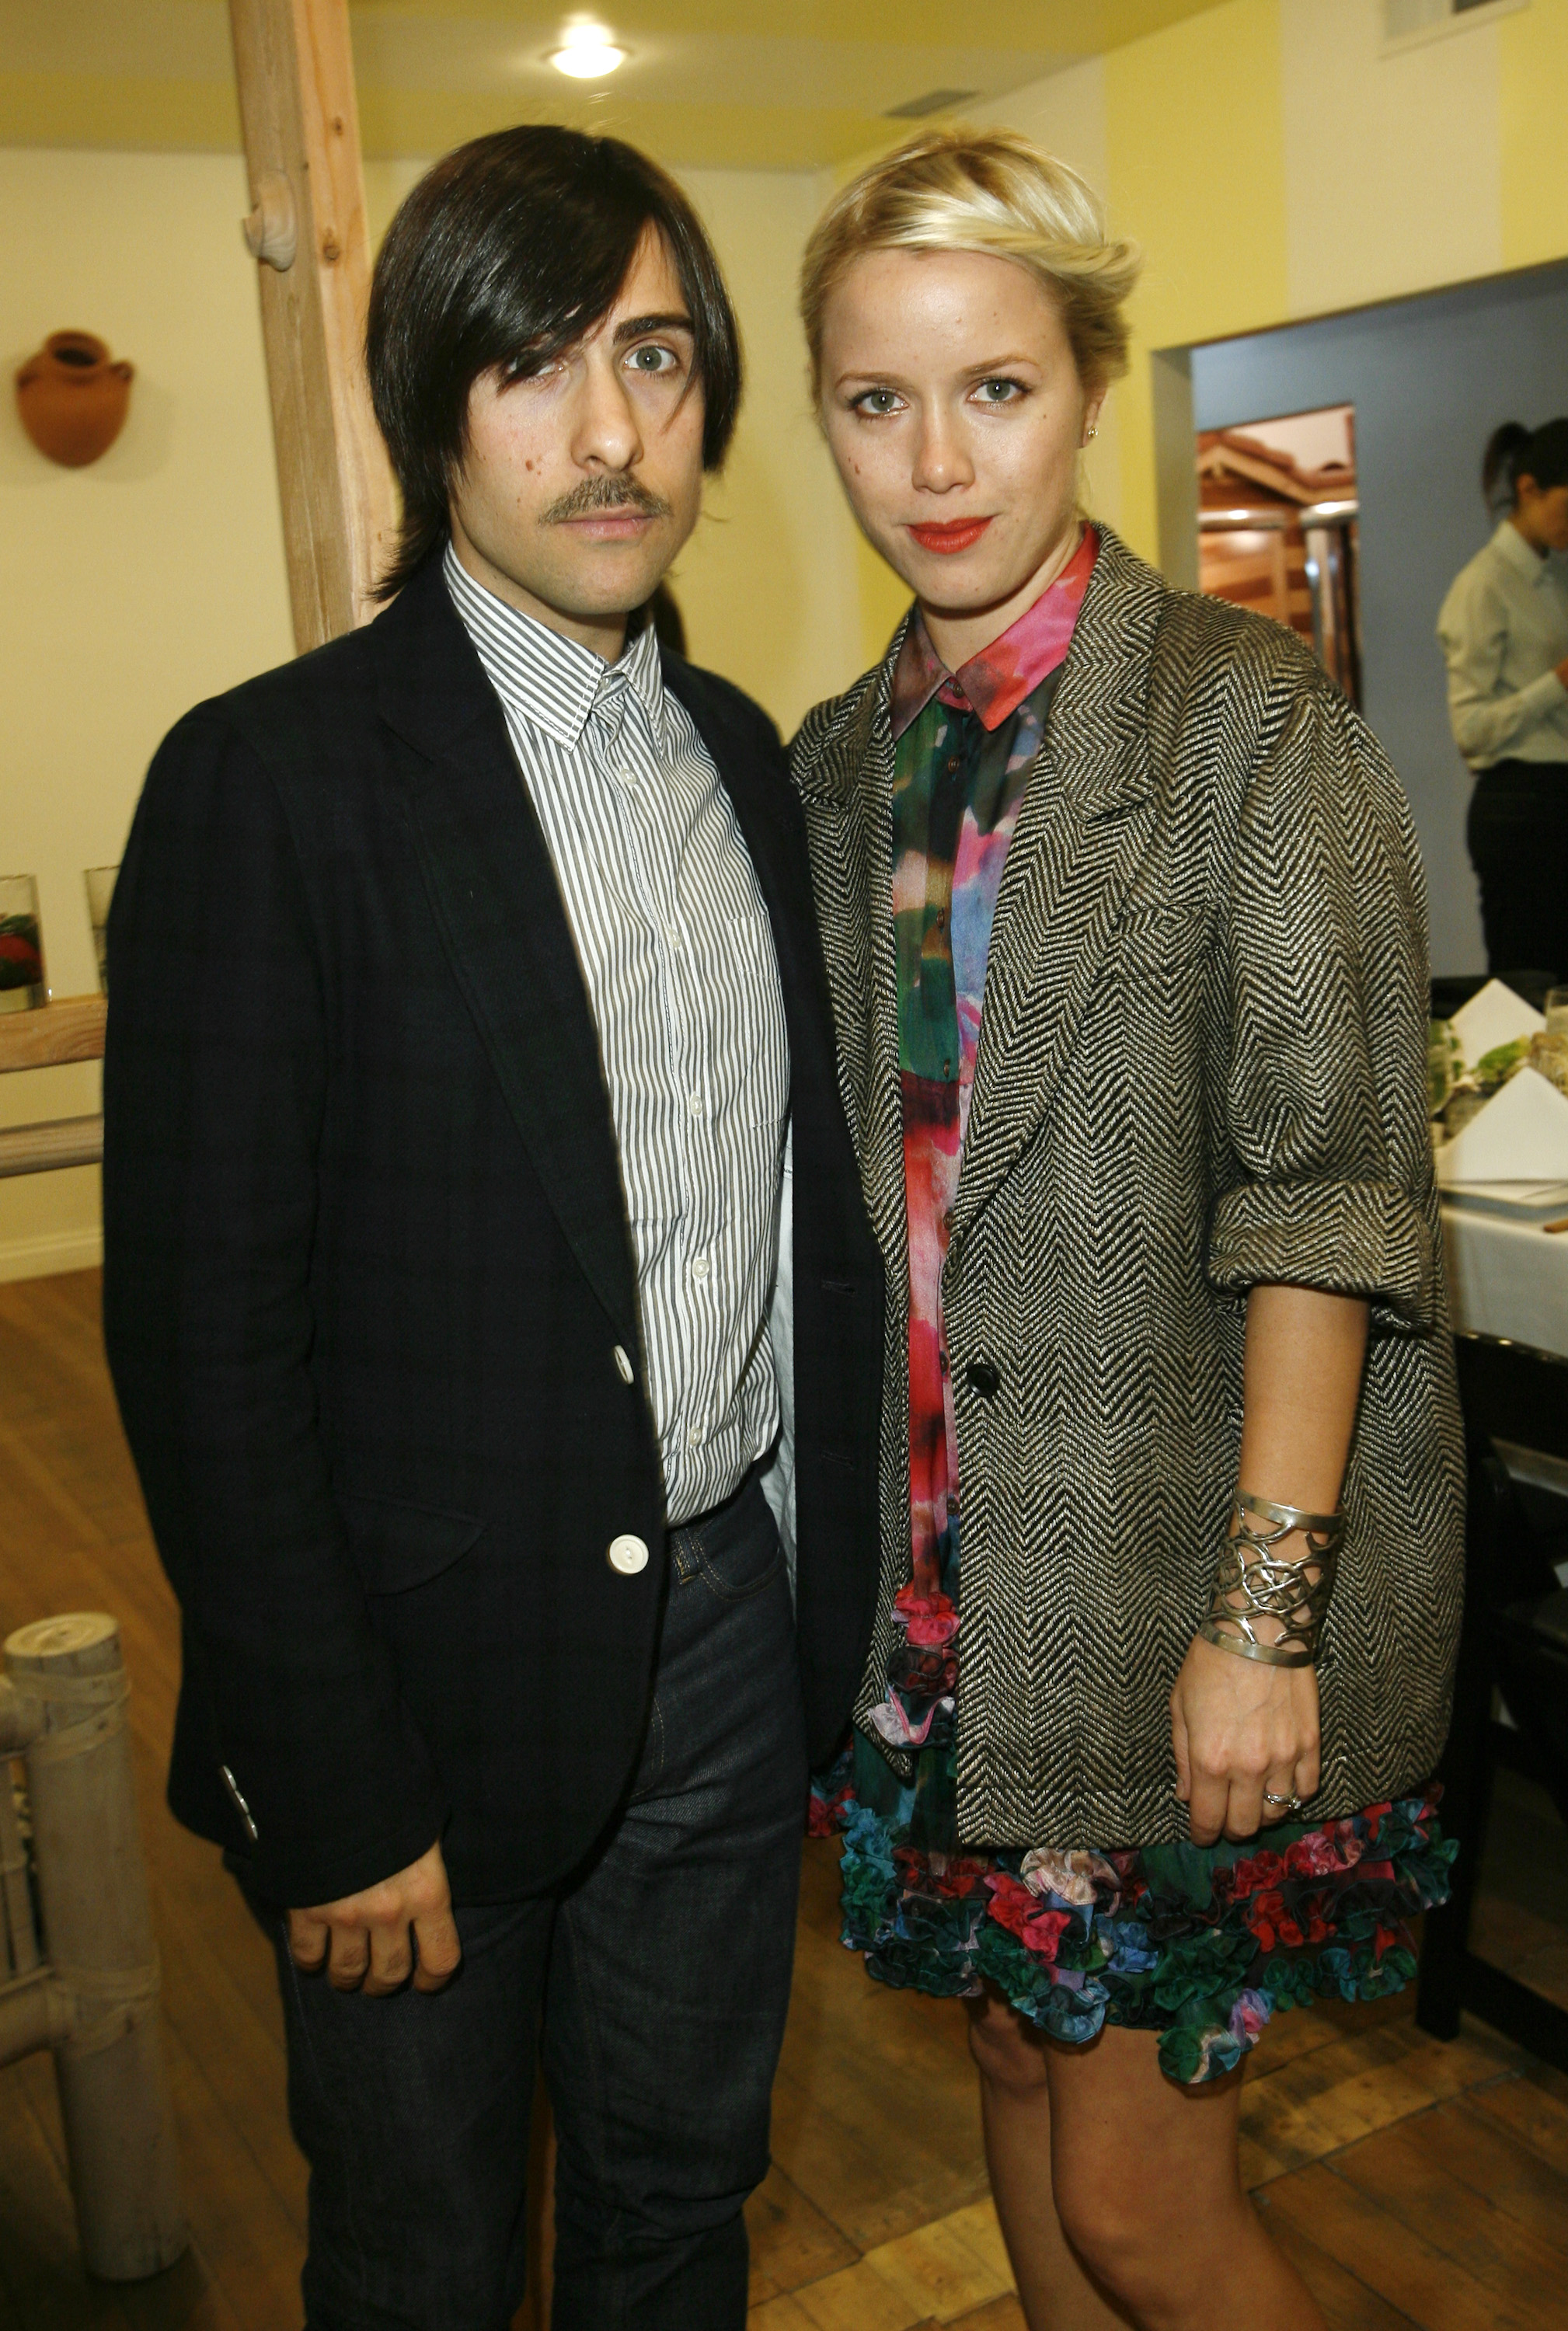 Jason Schwartzman (L) and Brady Cunningham attend a Dinner Party hosted by Opening Ceremony L.A. on January 15, 2010. | Source: Getty Images